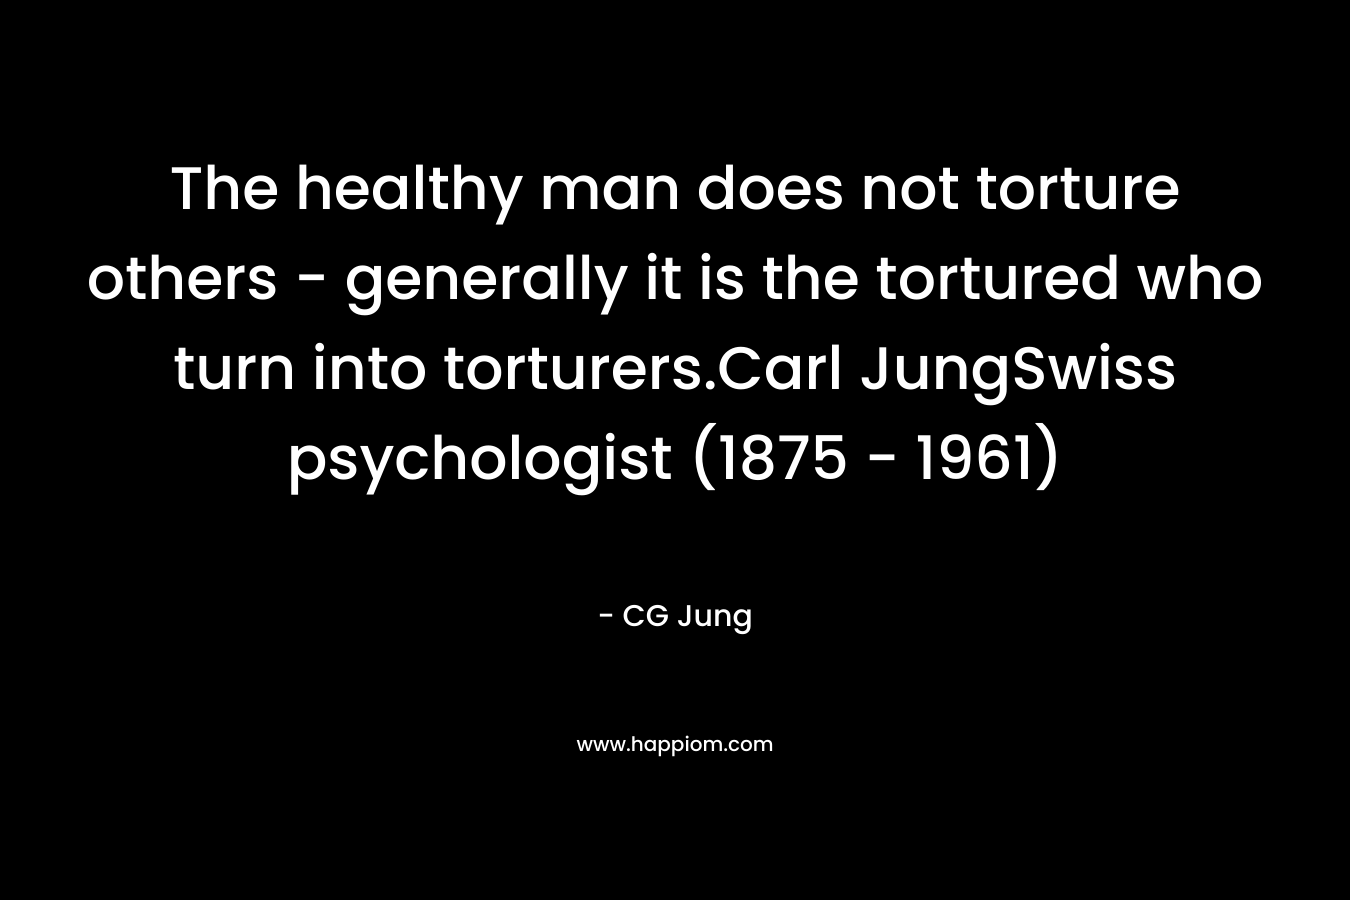 The healthy man does not torture others – generally it is the tortured who turn into torturers.Carl JungSwiss psychologist (1875 – 1961) – CG Jung